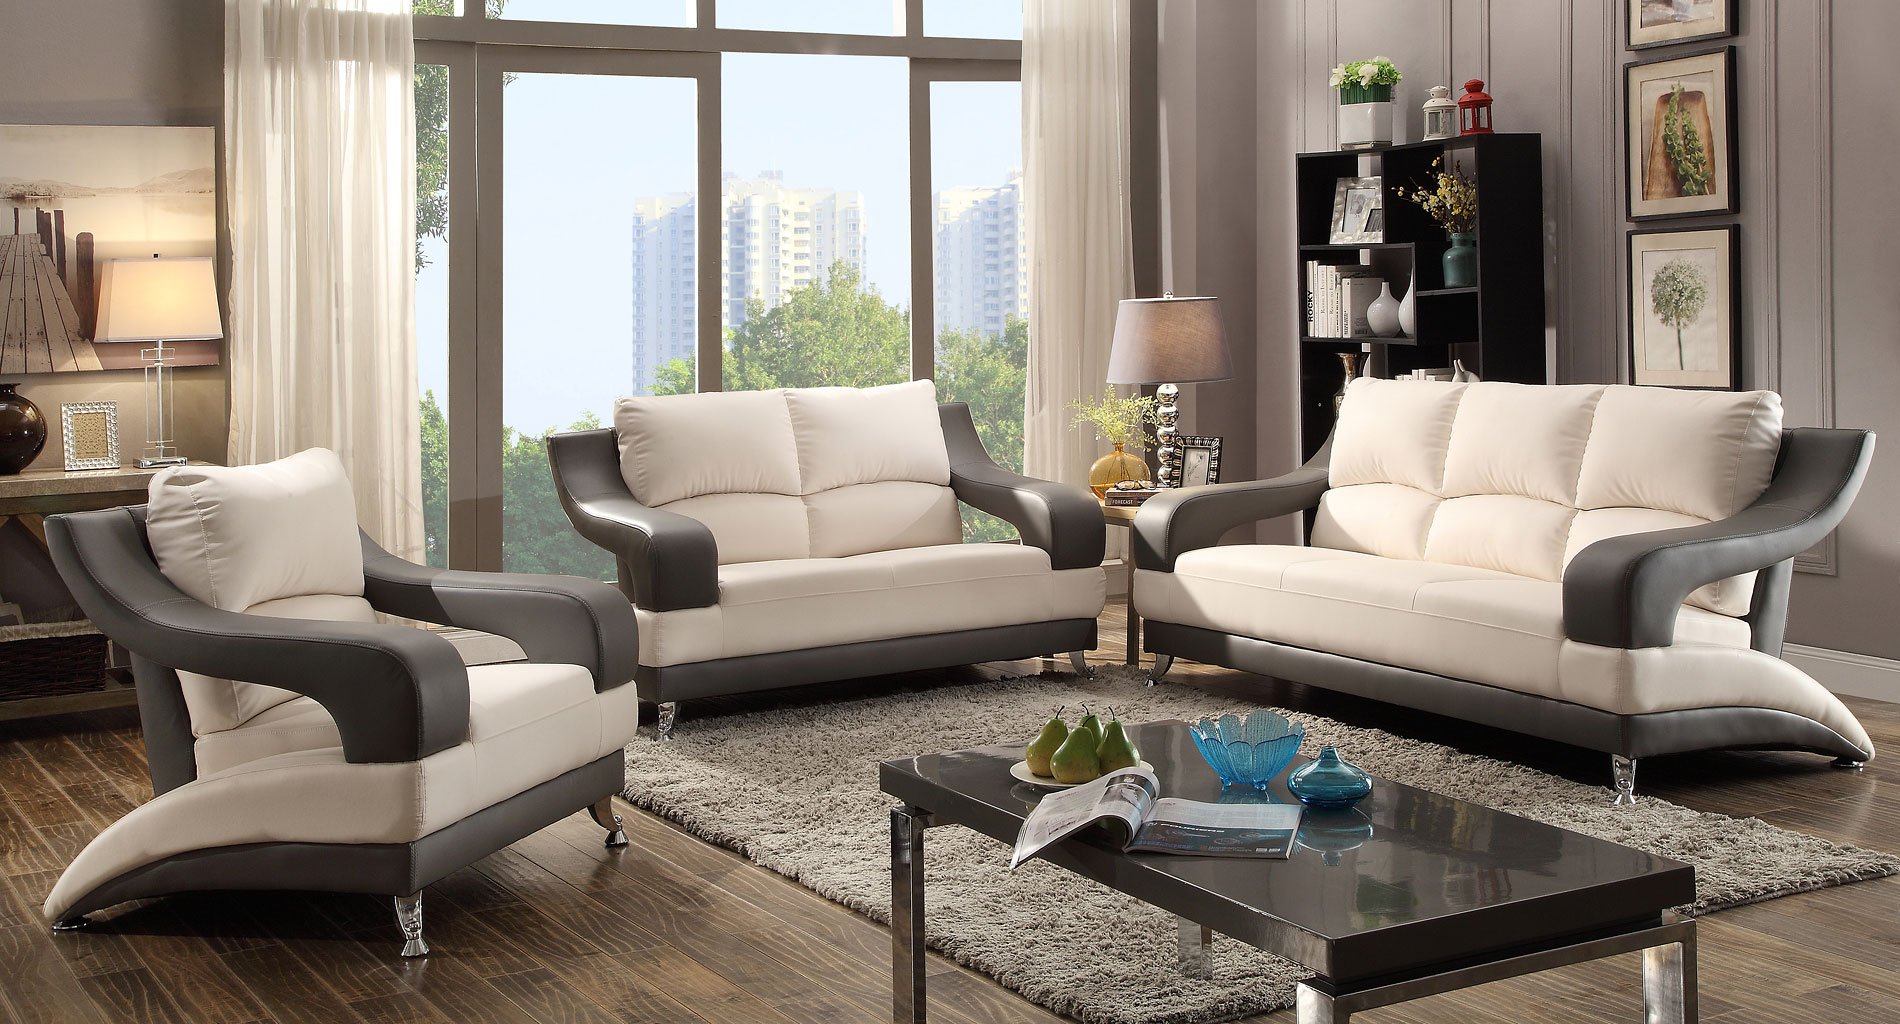 G259 Modern Living Room Set (White and Gray) by Glory Furniture ...